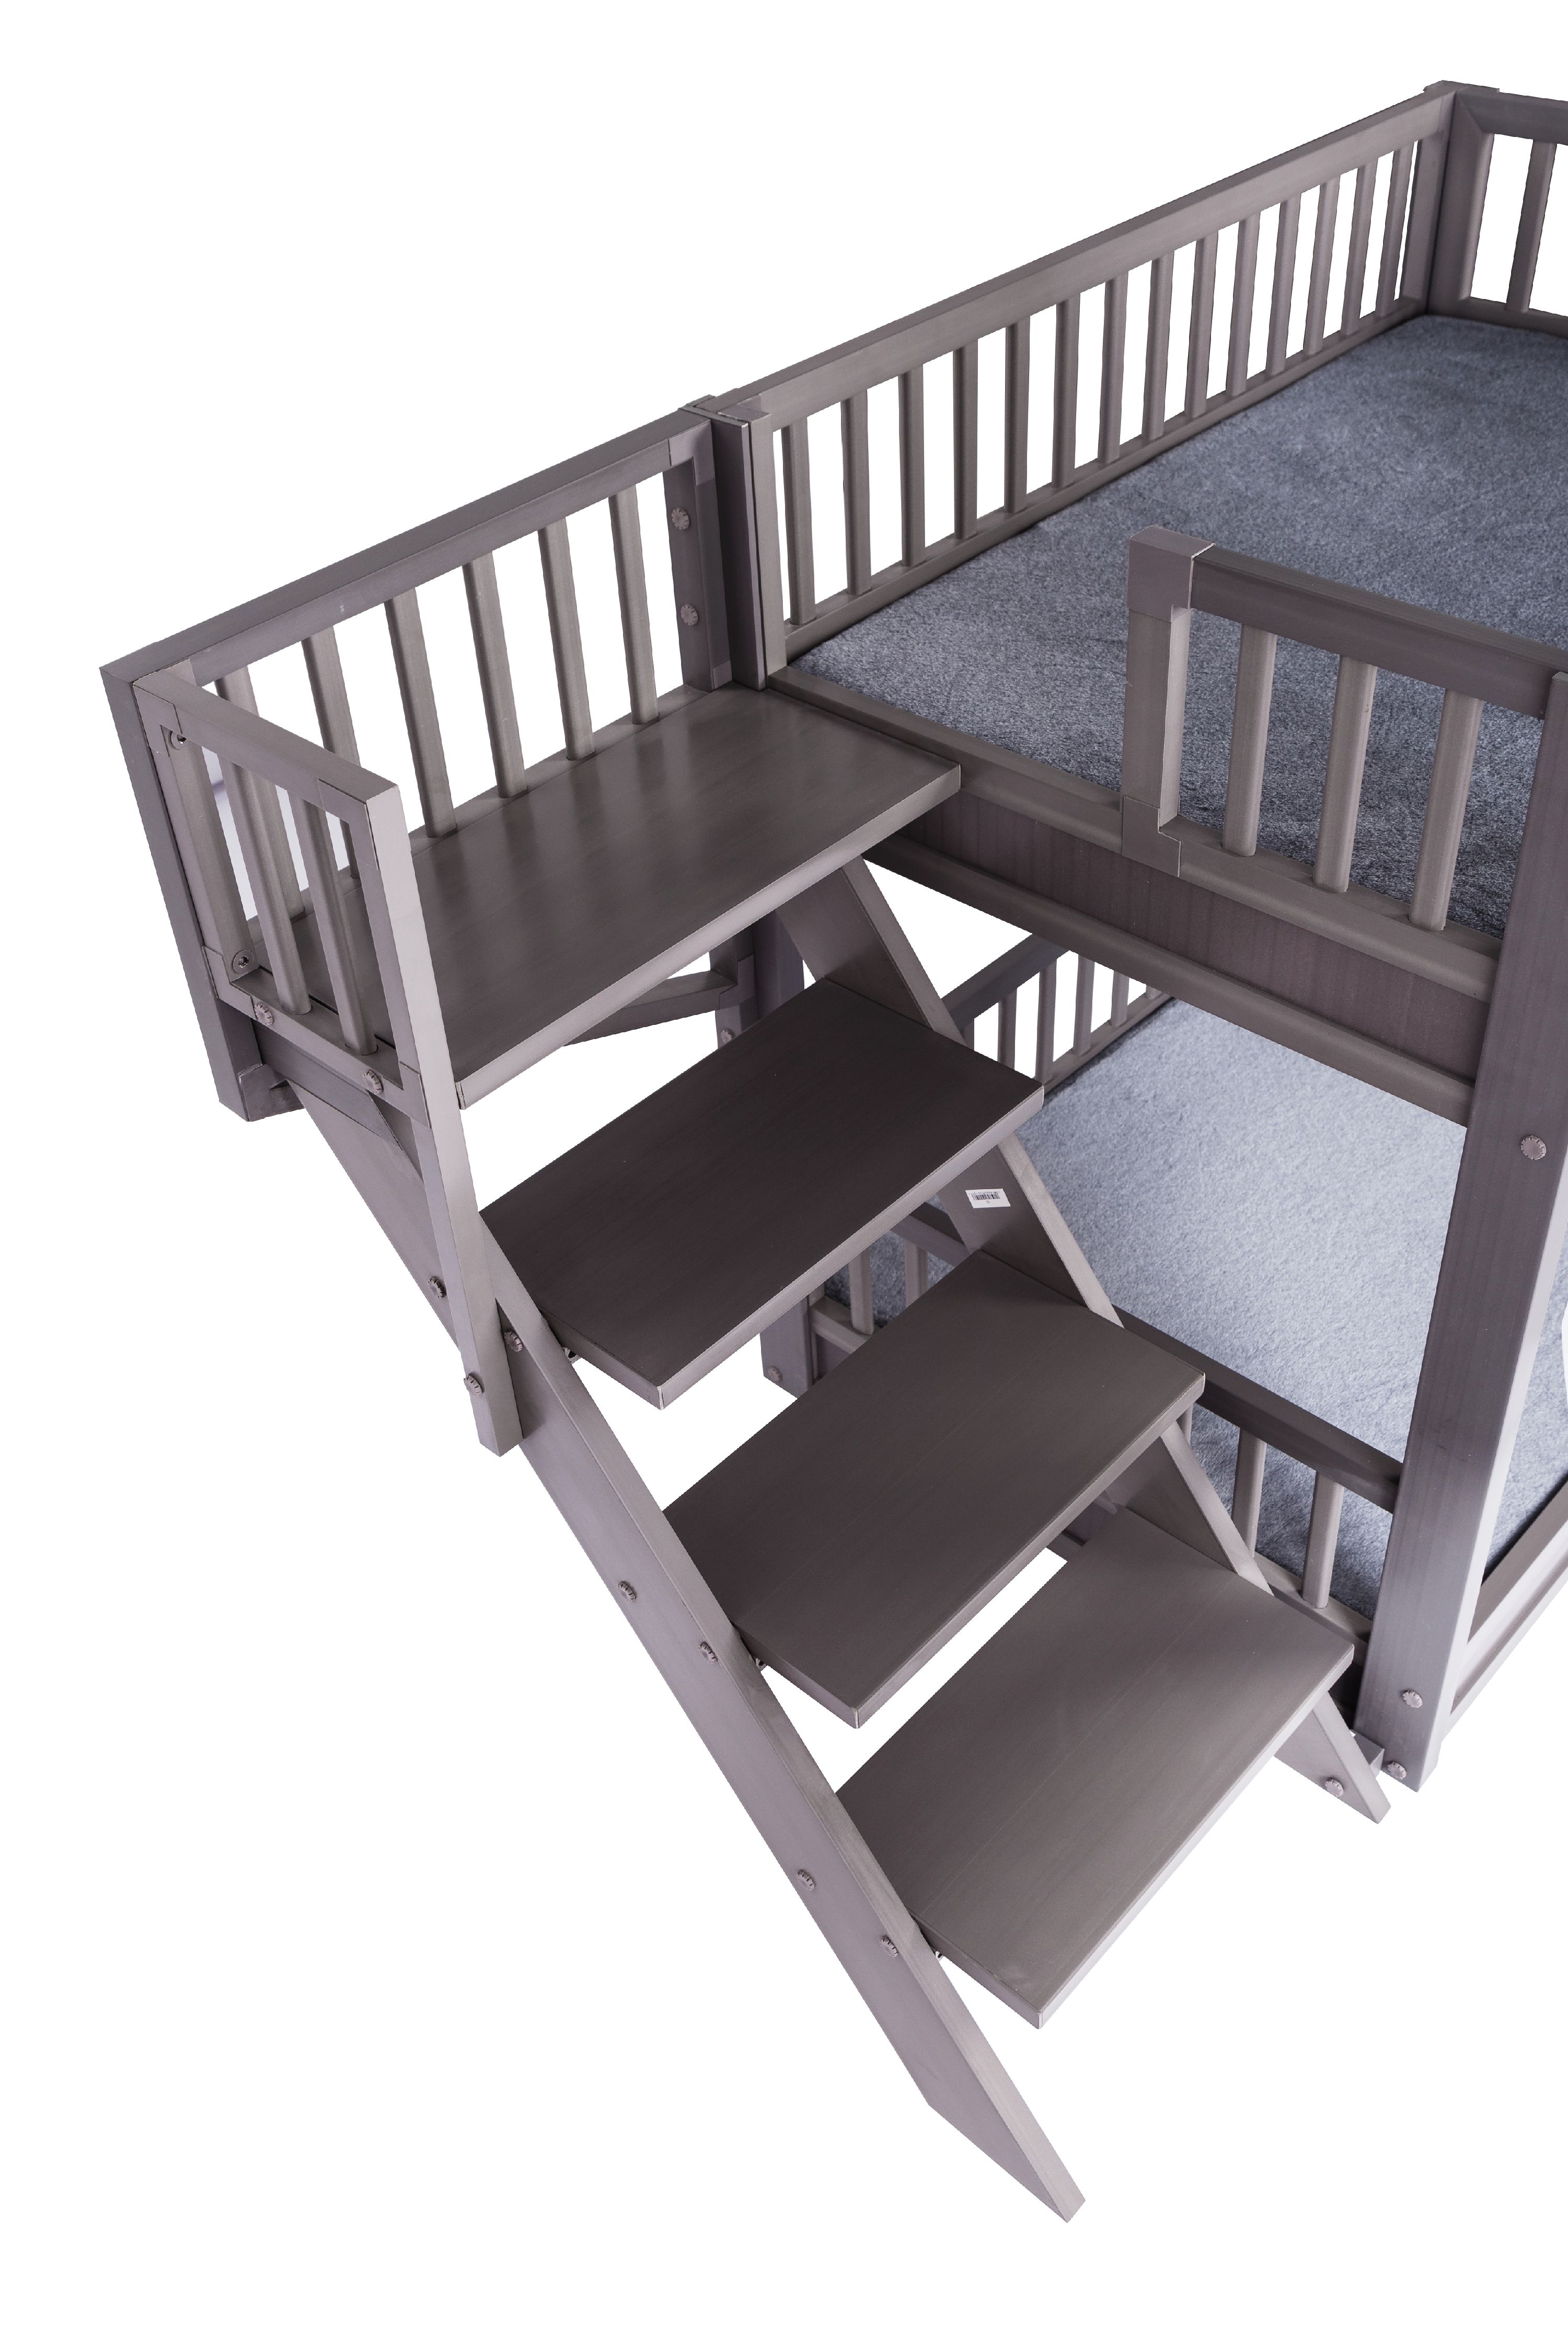 Ecoflex Dog Bunk Bed with Removable Cushions, Gray - image 5 of 10